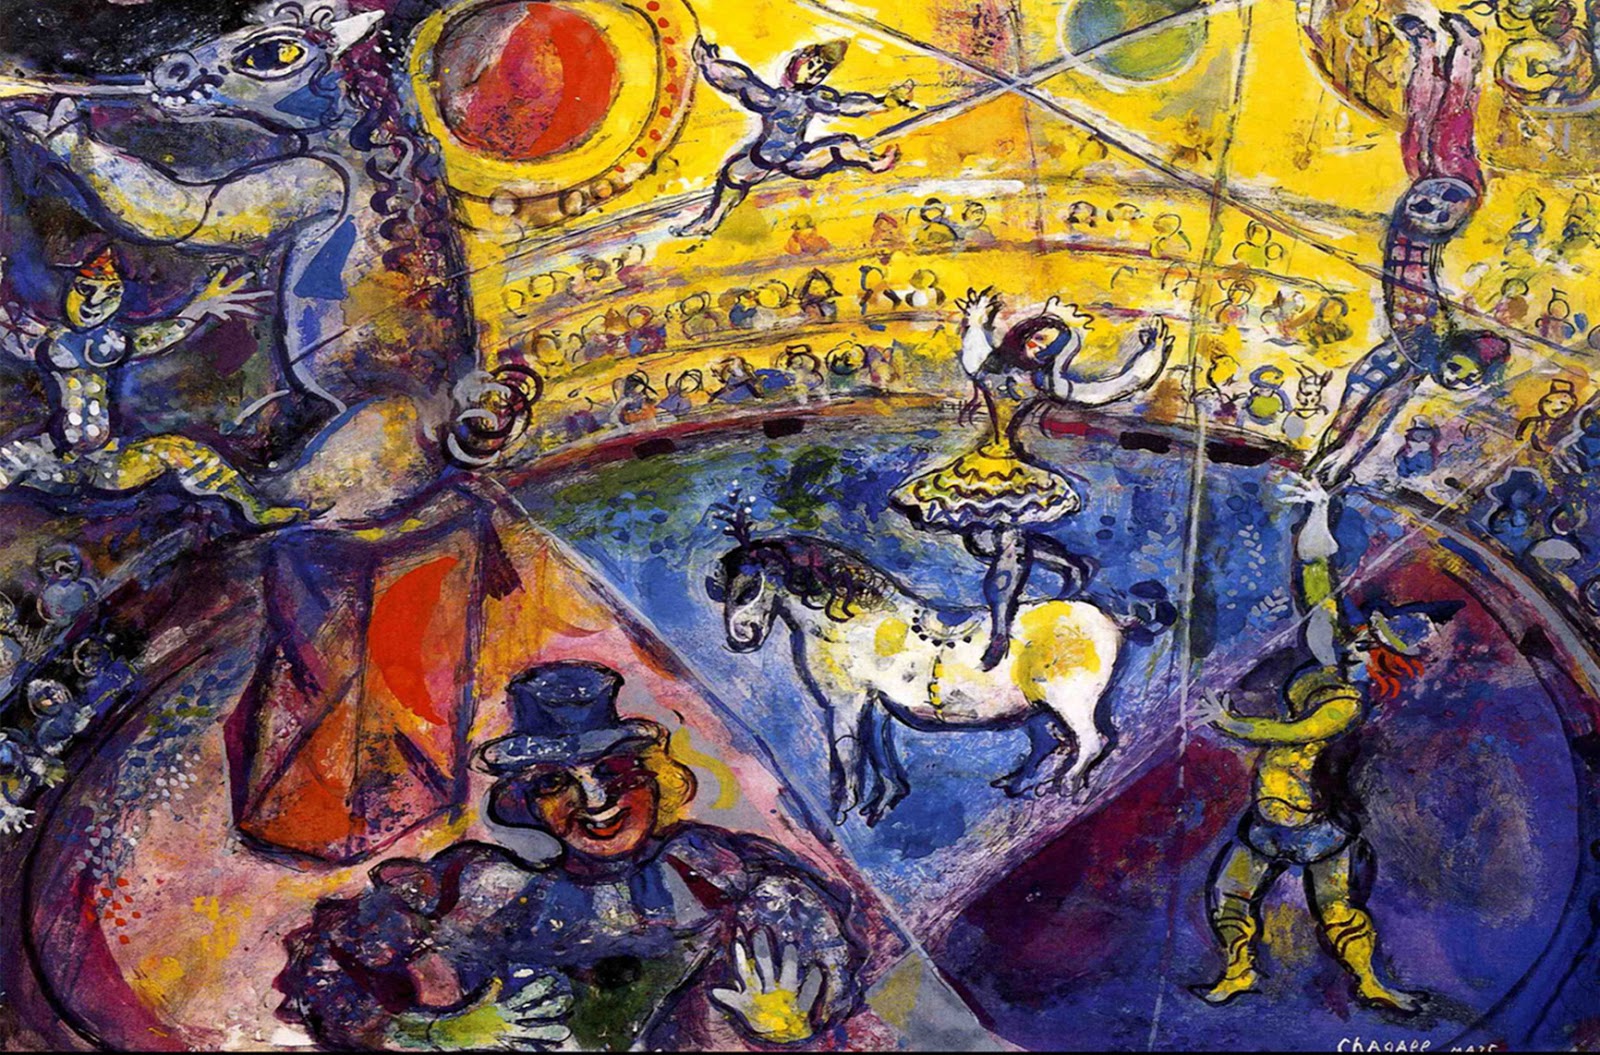 The Circus by Marc Chagall - 1964 - - private collection